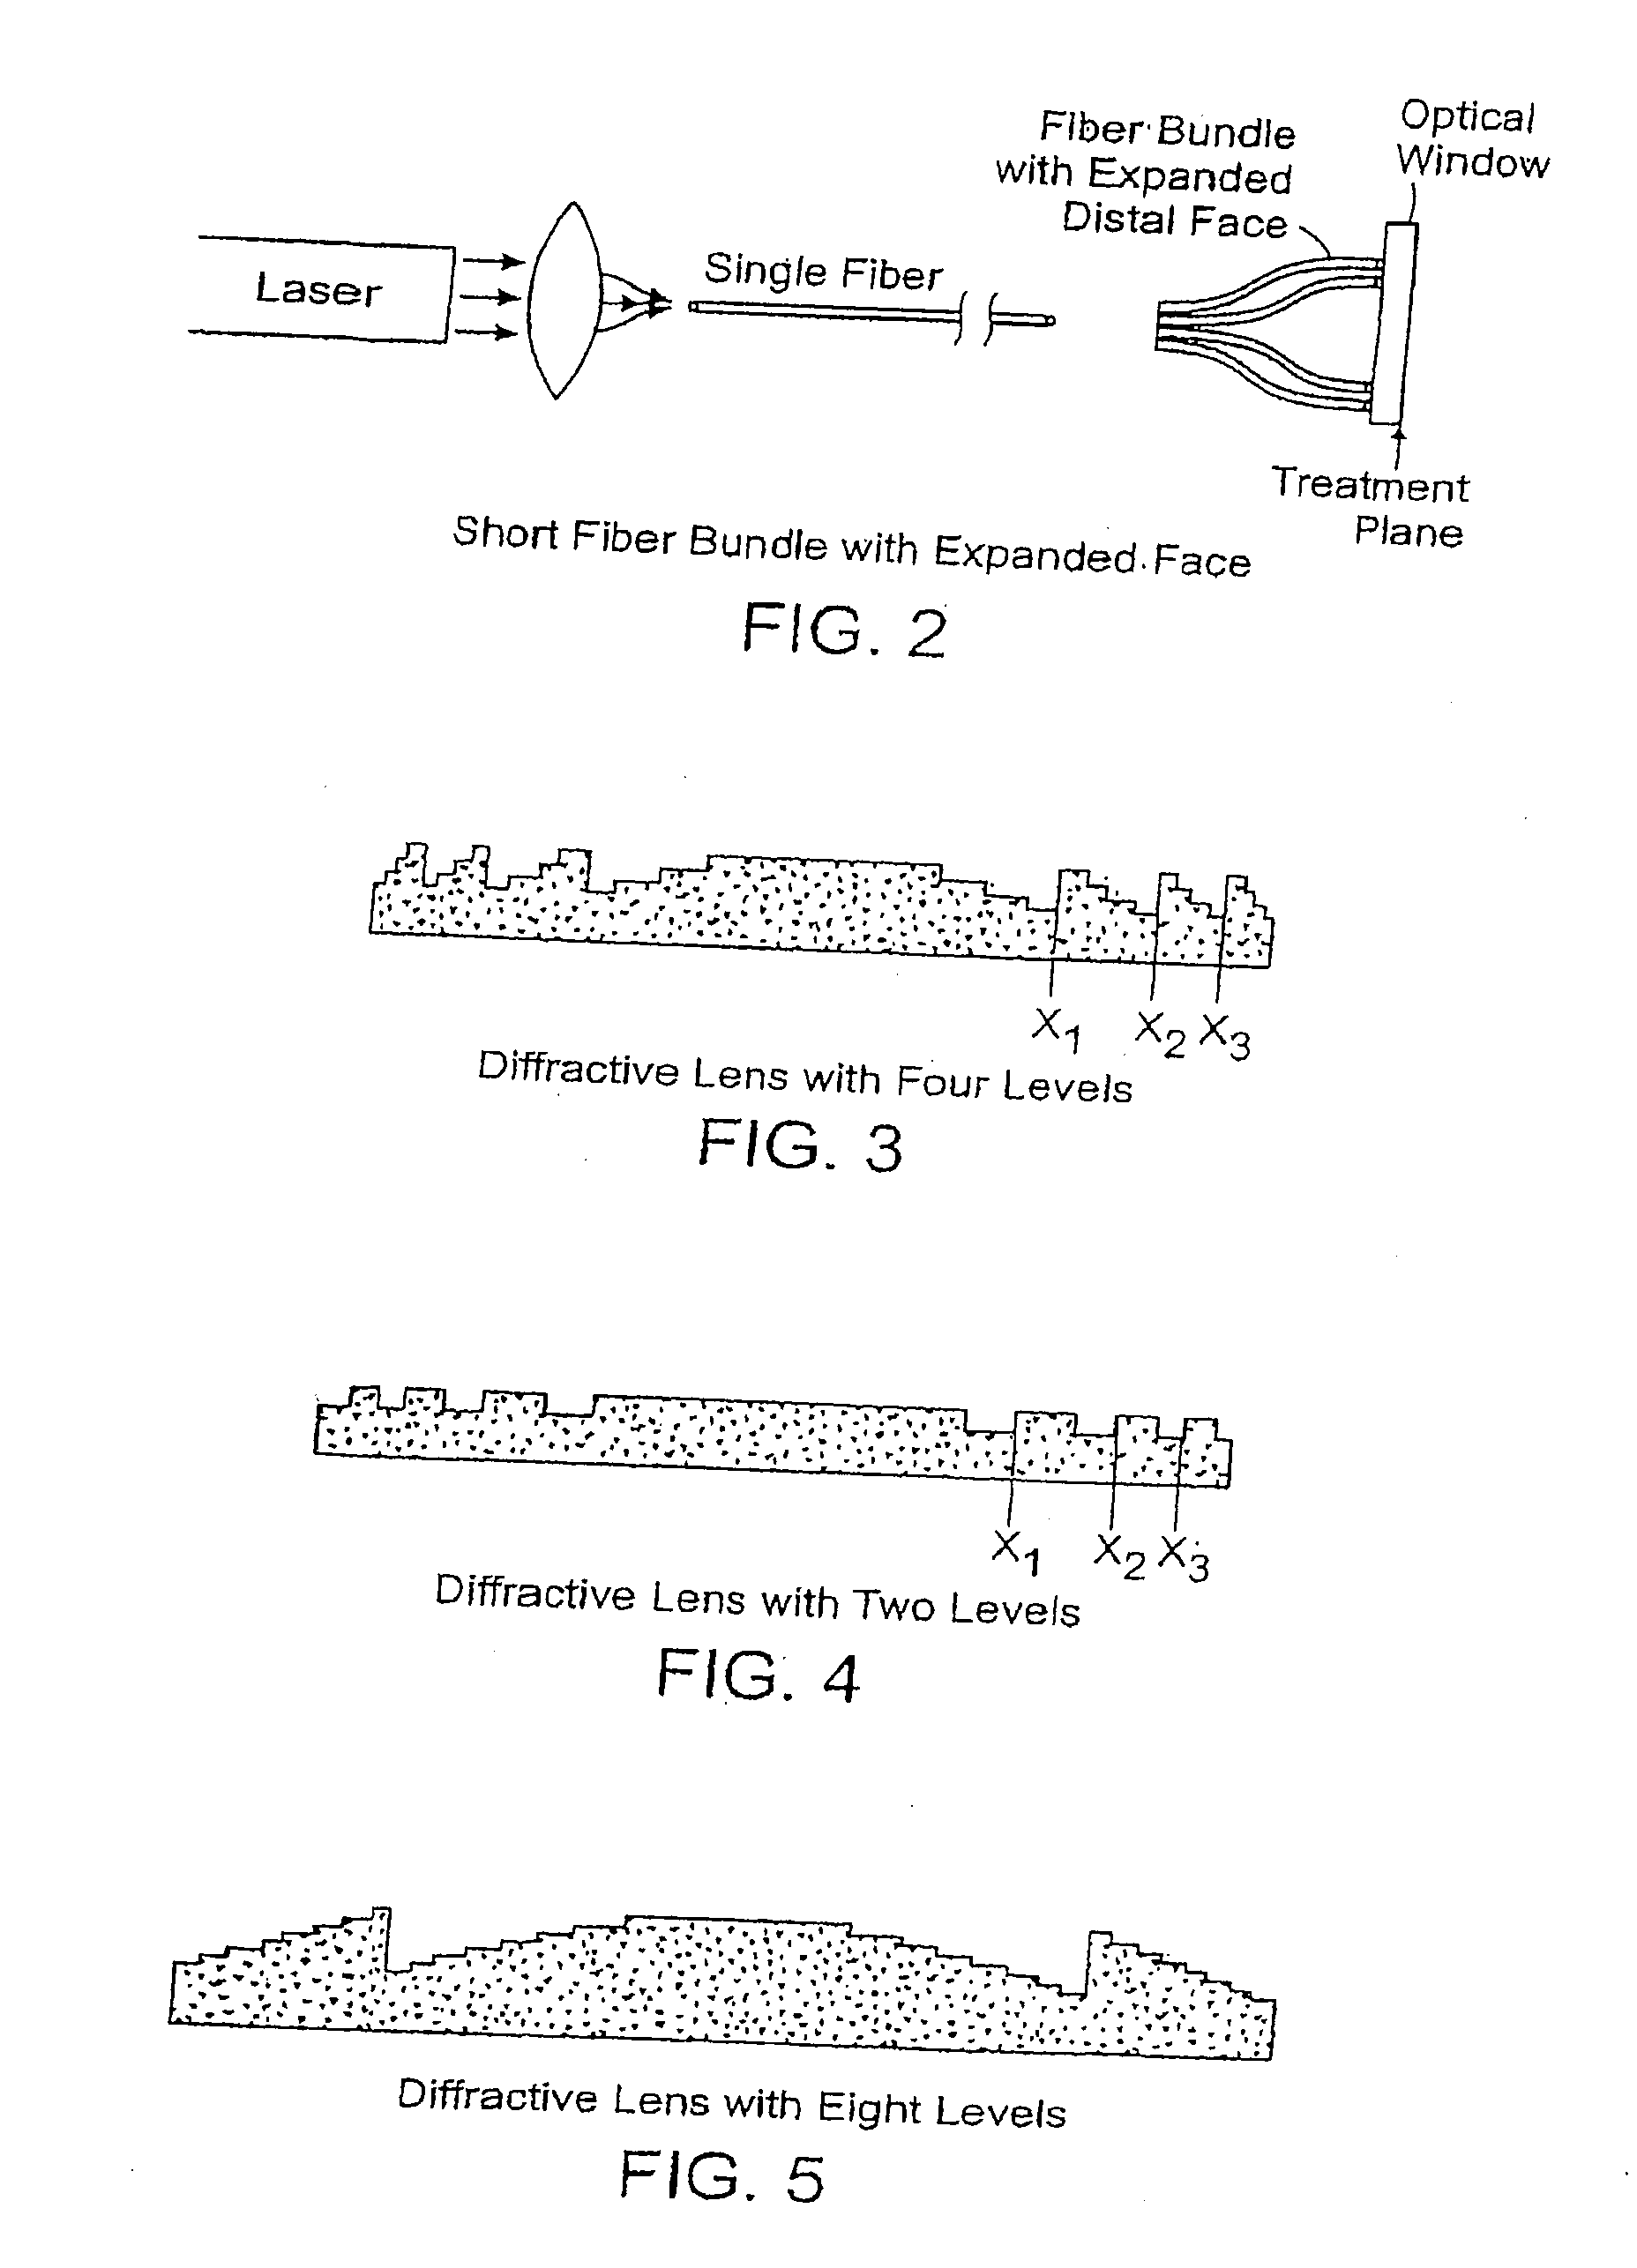 Methods And Systems For Laser Treatment Using Non-Uniform Output Beam